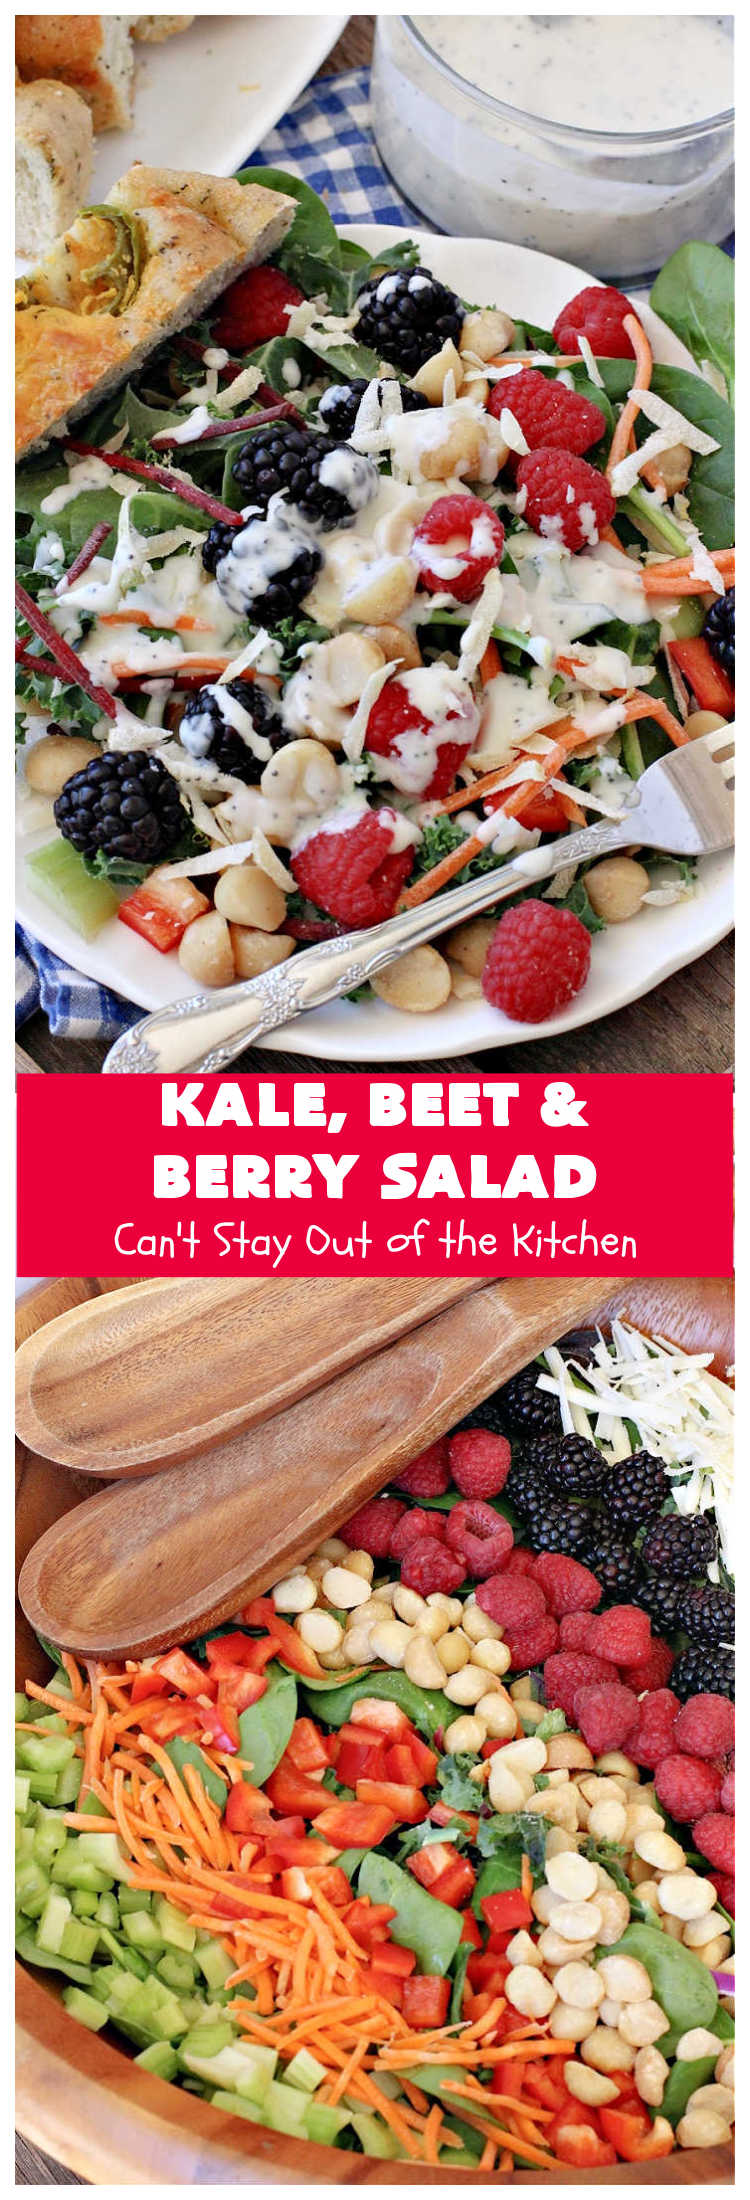 Kale, Beet and Berry Salad | Can't Stay Out of the Kitchen | This amazing #salad will knock your socks off! Seriously. It features #raspberries, #blackberries, #MacadamiaNuts & #asiago or #romano #cheese. Great for company dinners. #GlutenFree #beets #kale #healthy #LowCalorie #CleanEating